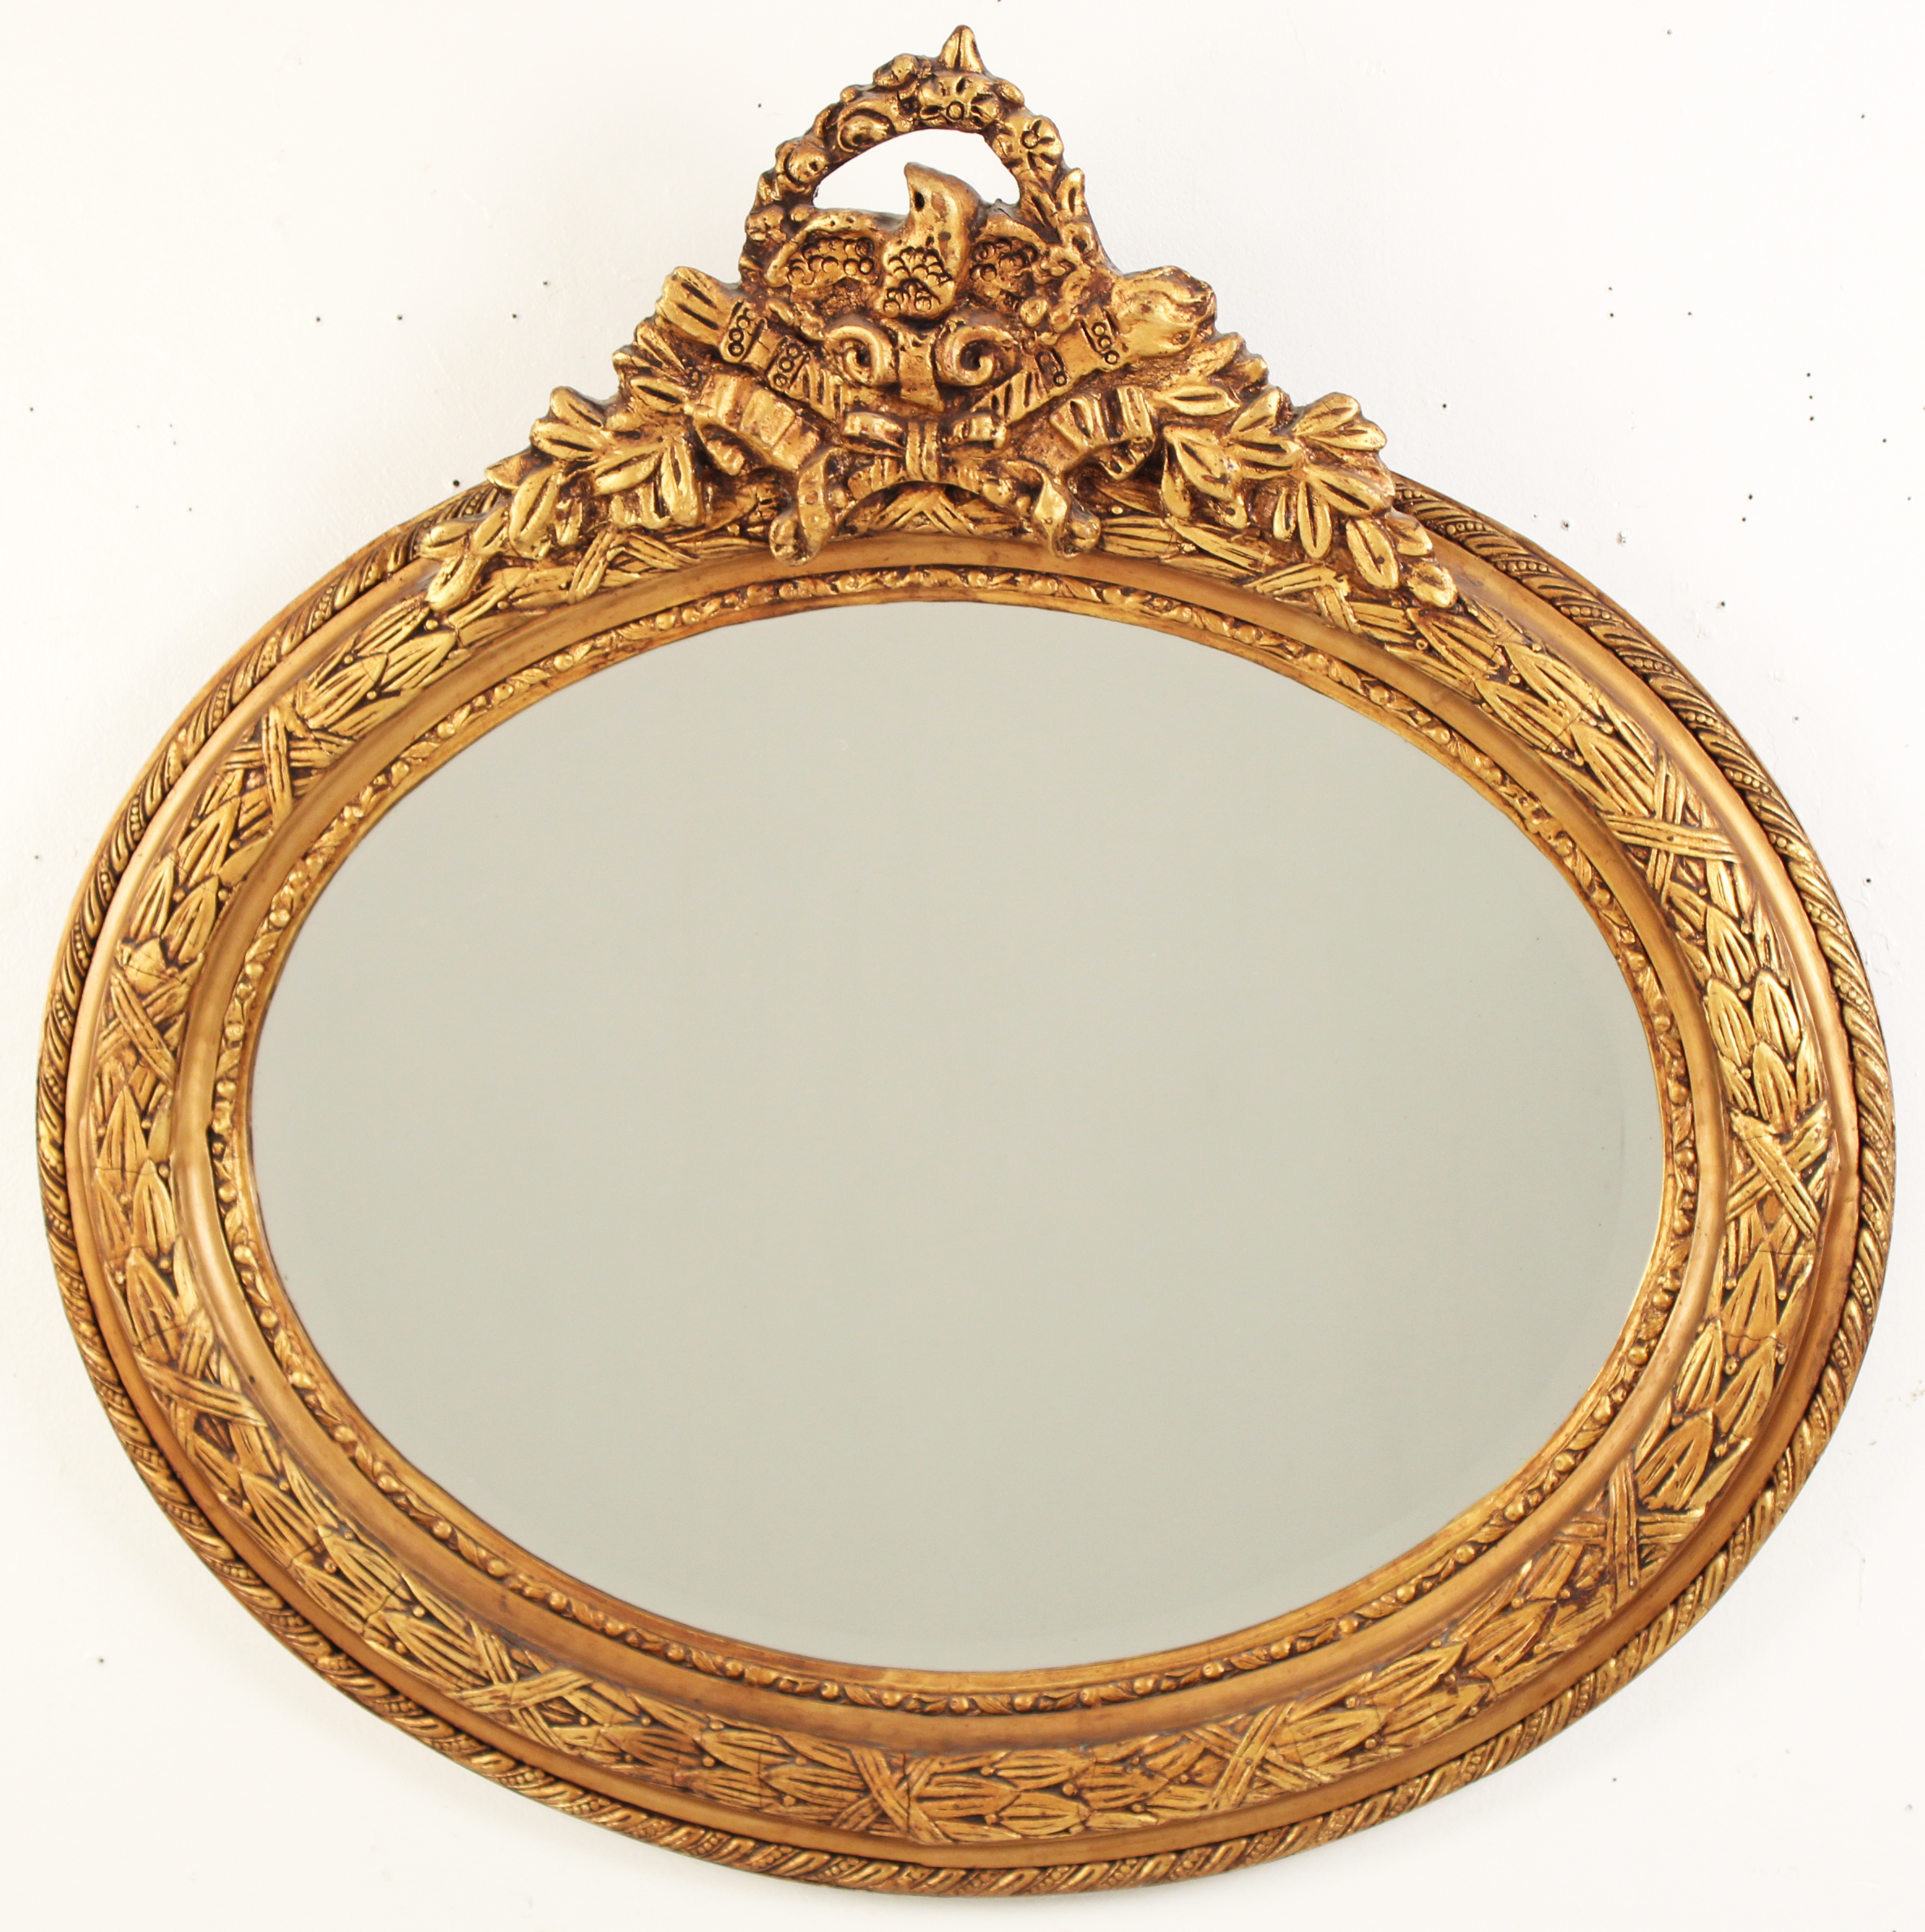 FRENCH STYLE GILTWOOD OVAL MIRROR